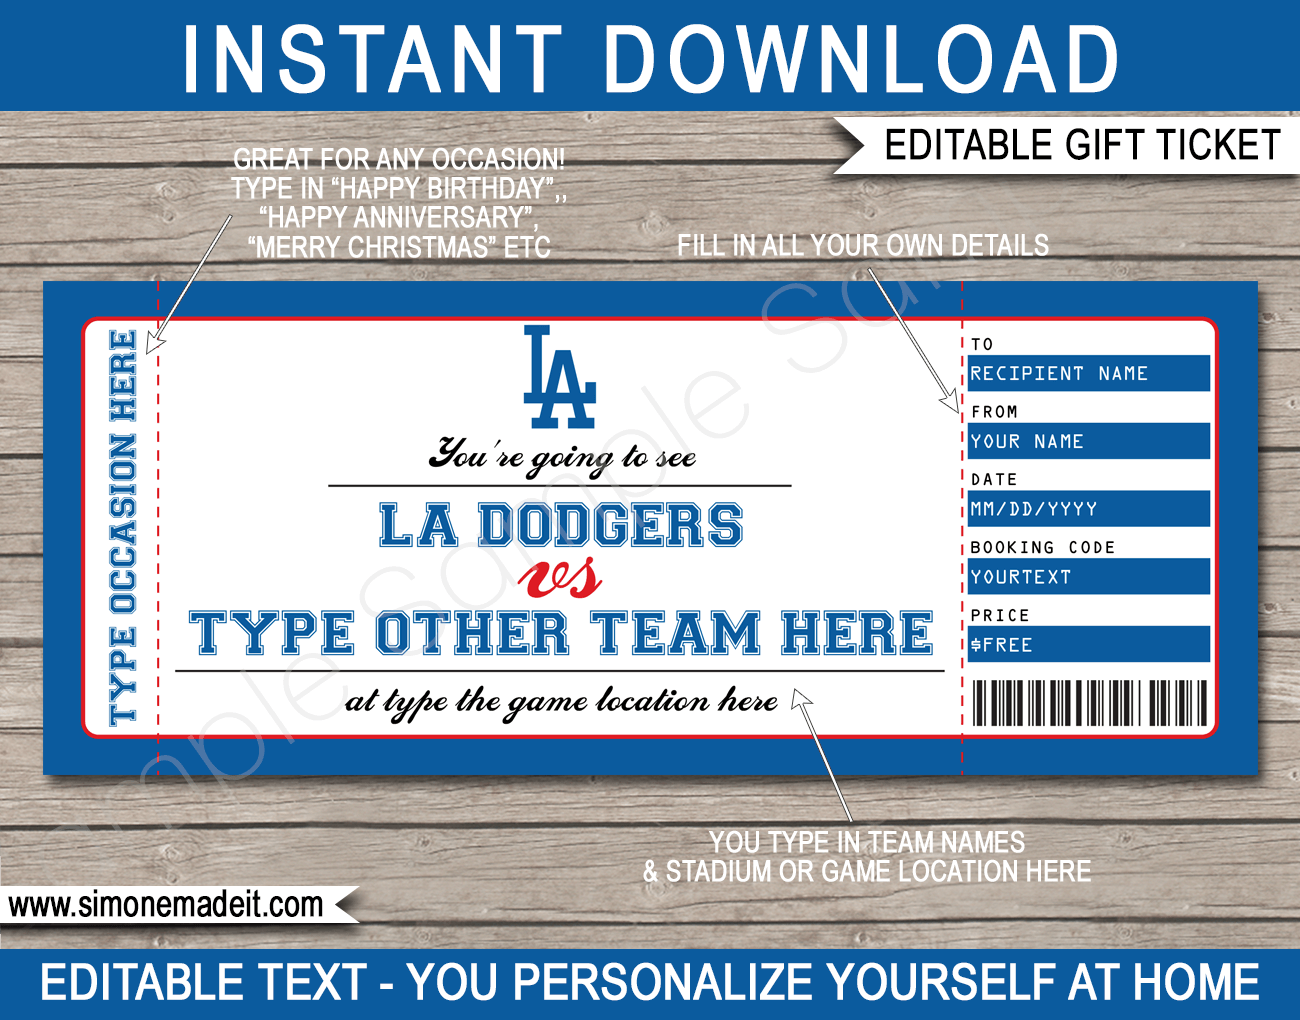 Need a last minute Father's Day - Los Angeles Dodgers